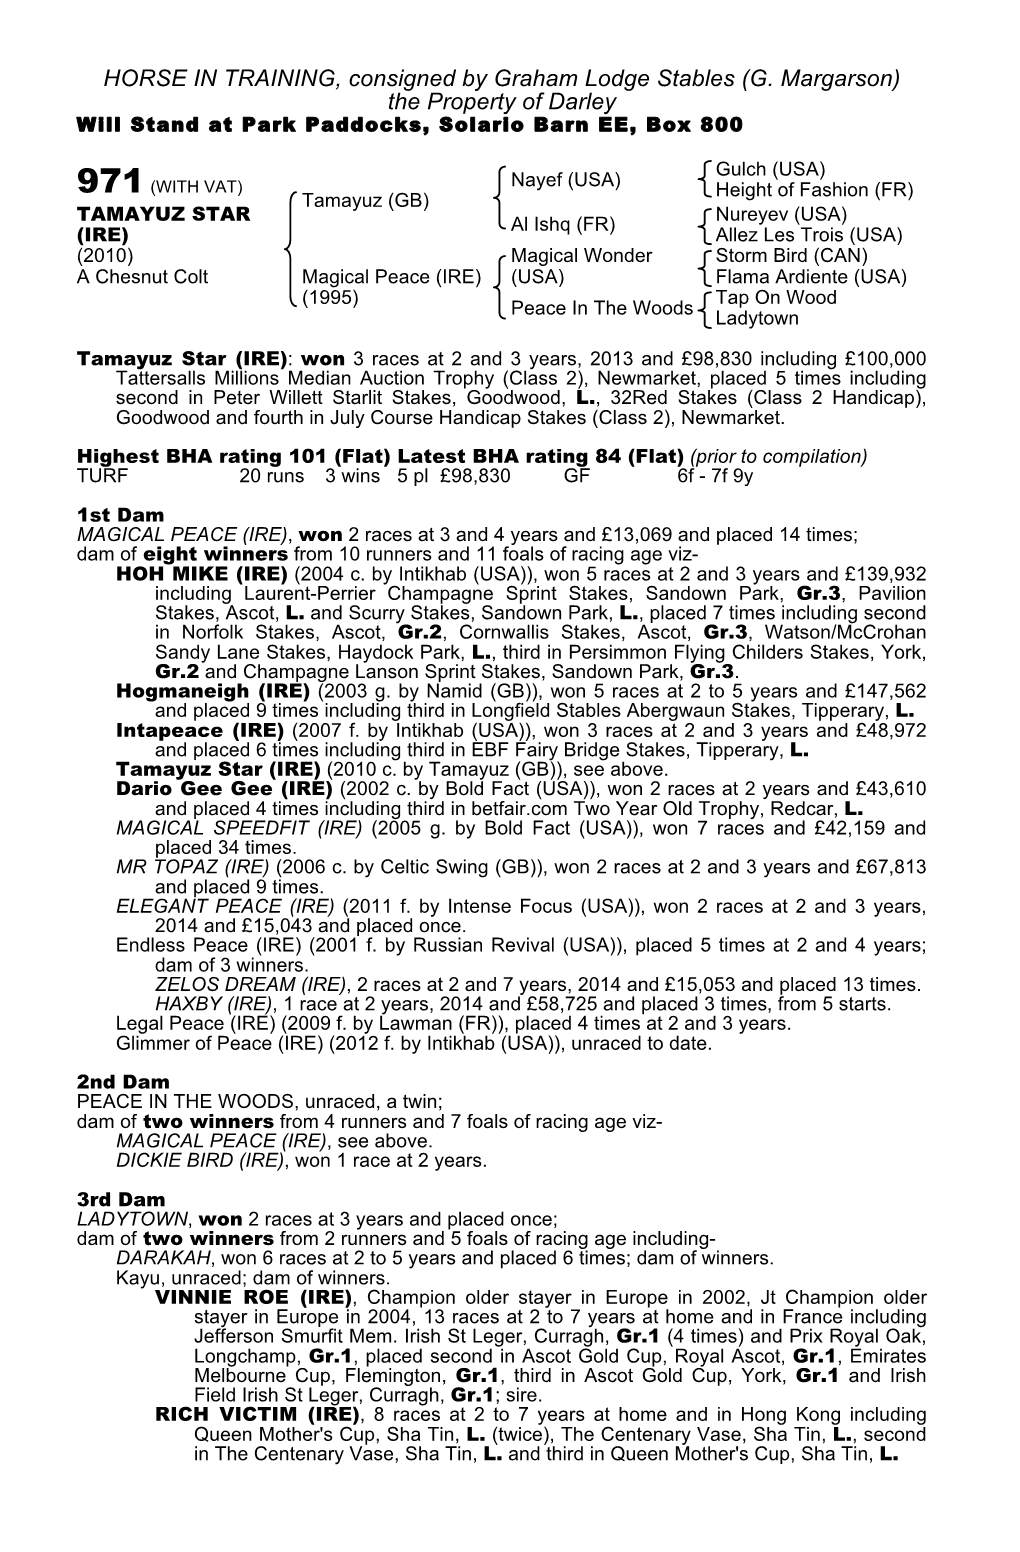 HORSE in TRAINING, Consigned by Graham Lodge Stables (G